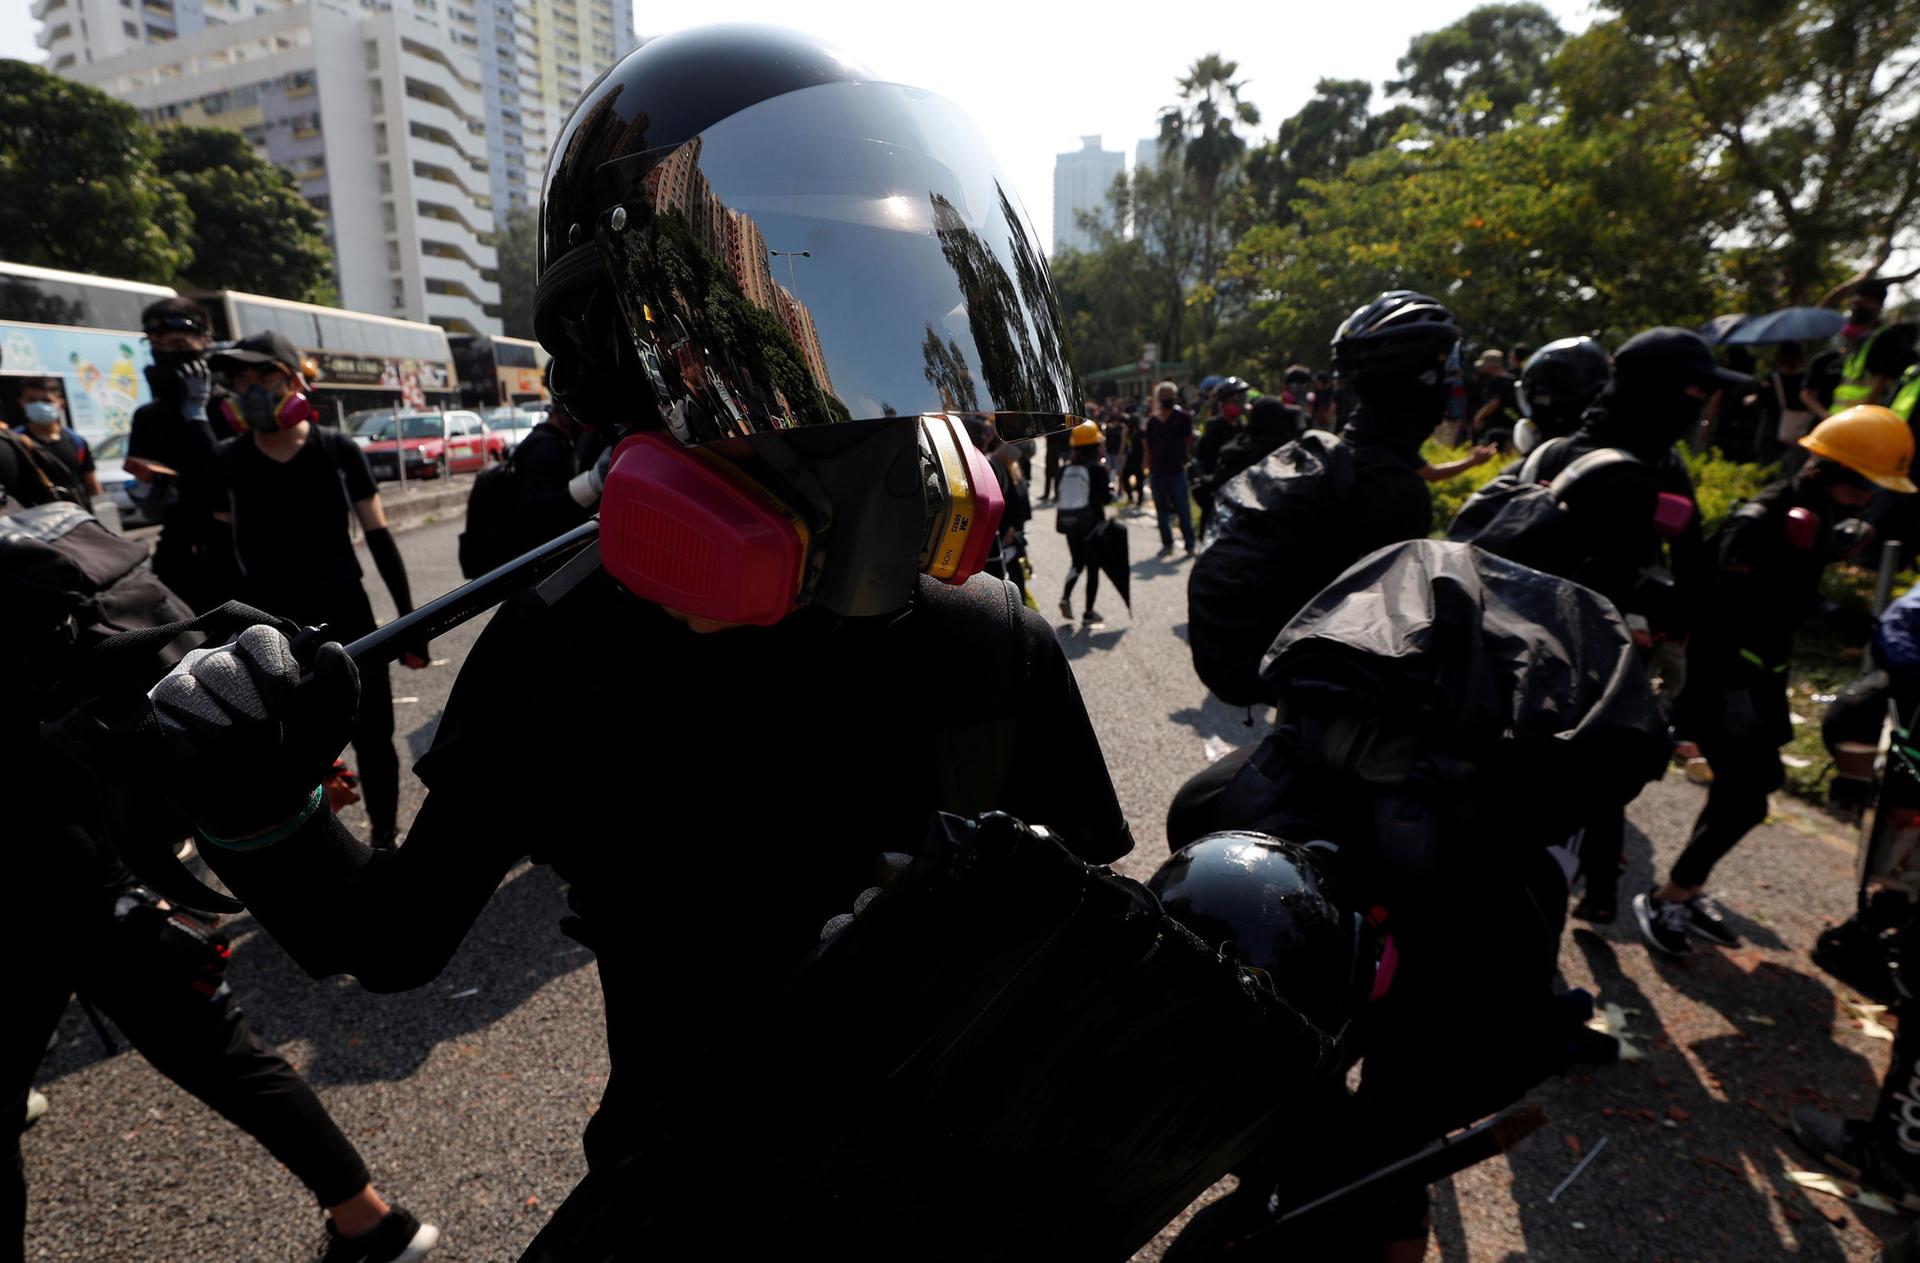 A protester is shown wearing a helmet with a reflective face shield and a pink gas mask.